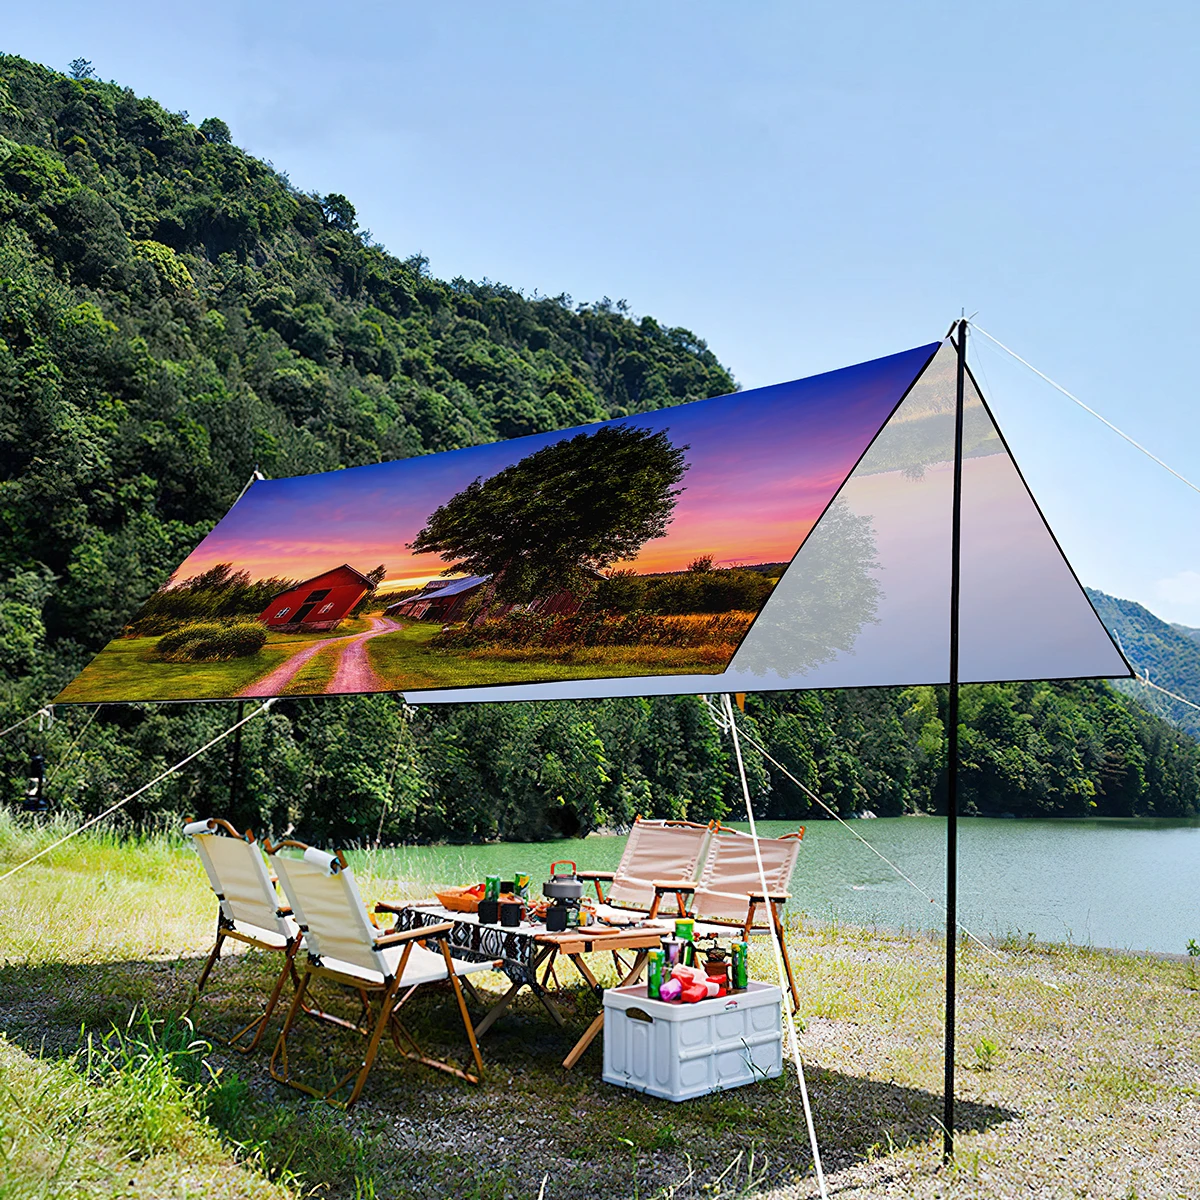 

Farm Print Sun Shade Canopy for A Large Group,Waterproof Lightweight Portable Foldable UV Resistant Tent For Picnic,Beach Party